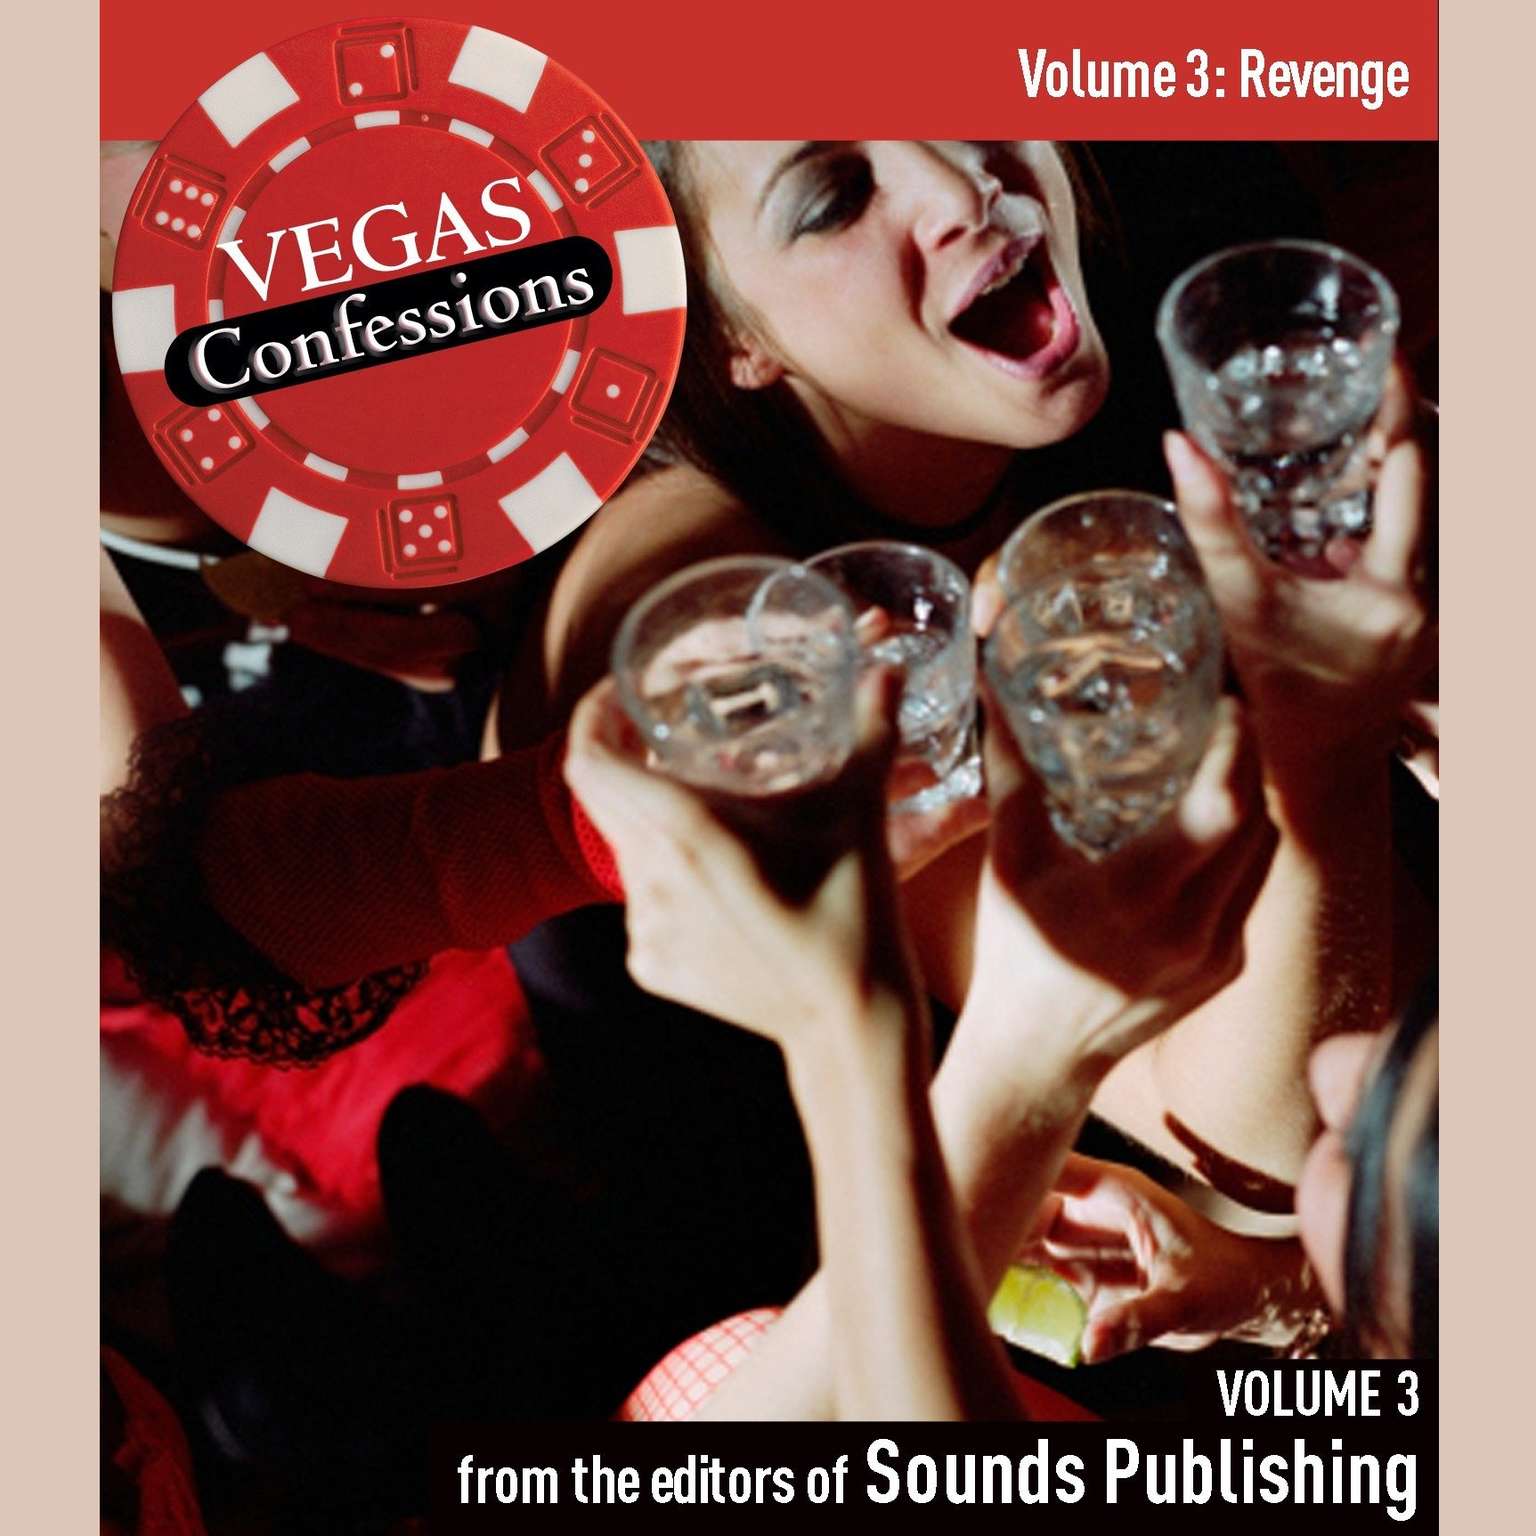 Vegas Confessions 3: Revenge Audiobook, by The Editors of Sounds Publishing